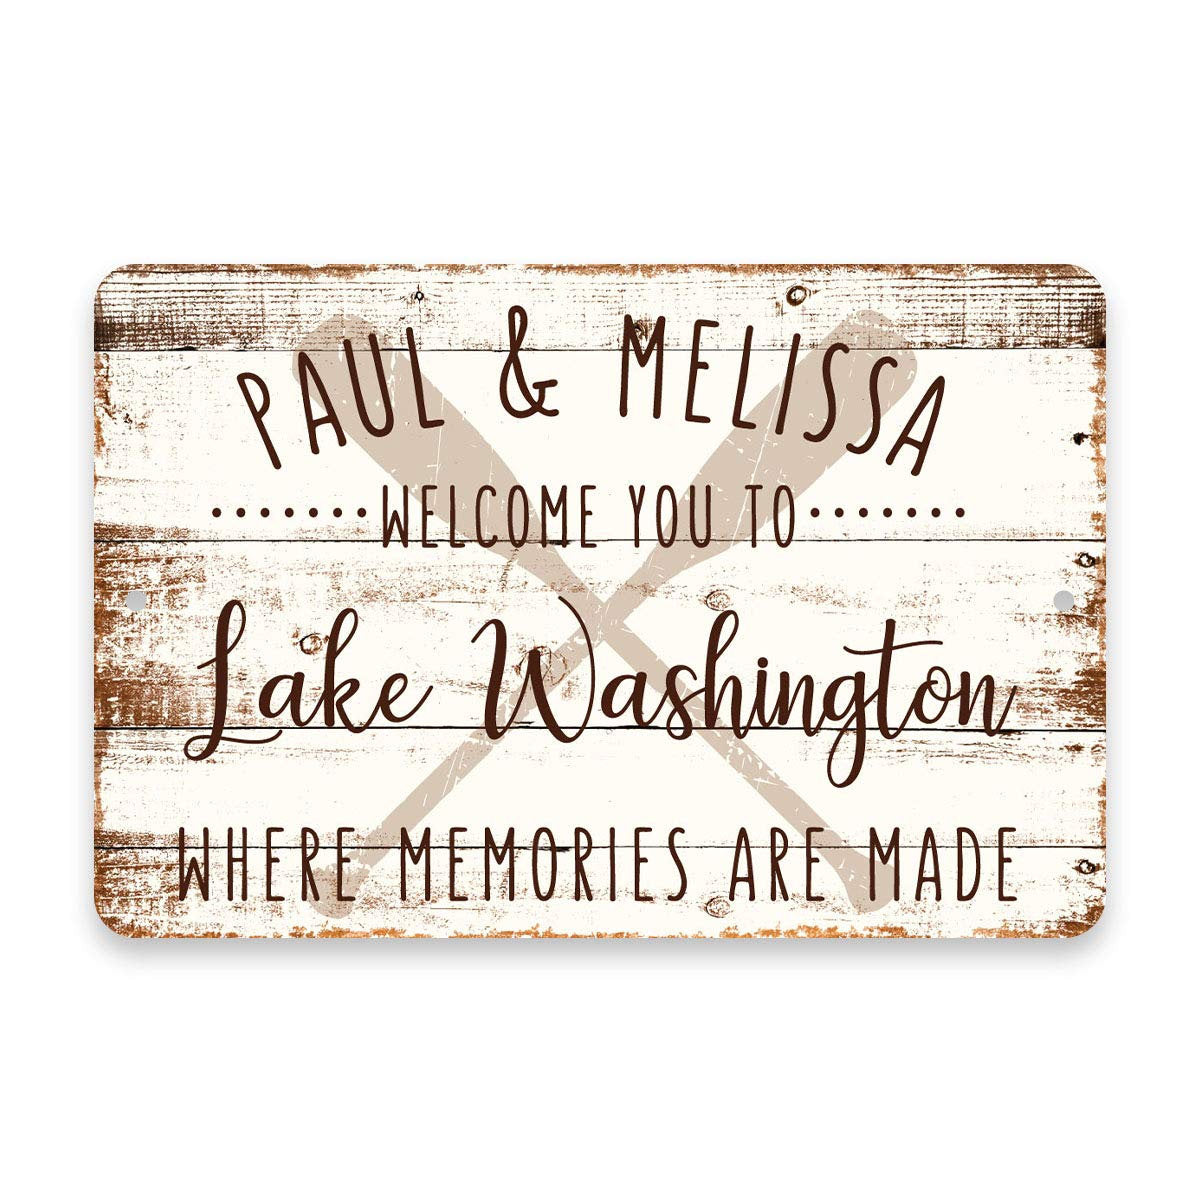 Personalized Welcome to Lake Washington Where Memories are Made Sign - 8 X 12 Metal Sign with Wood Look